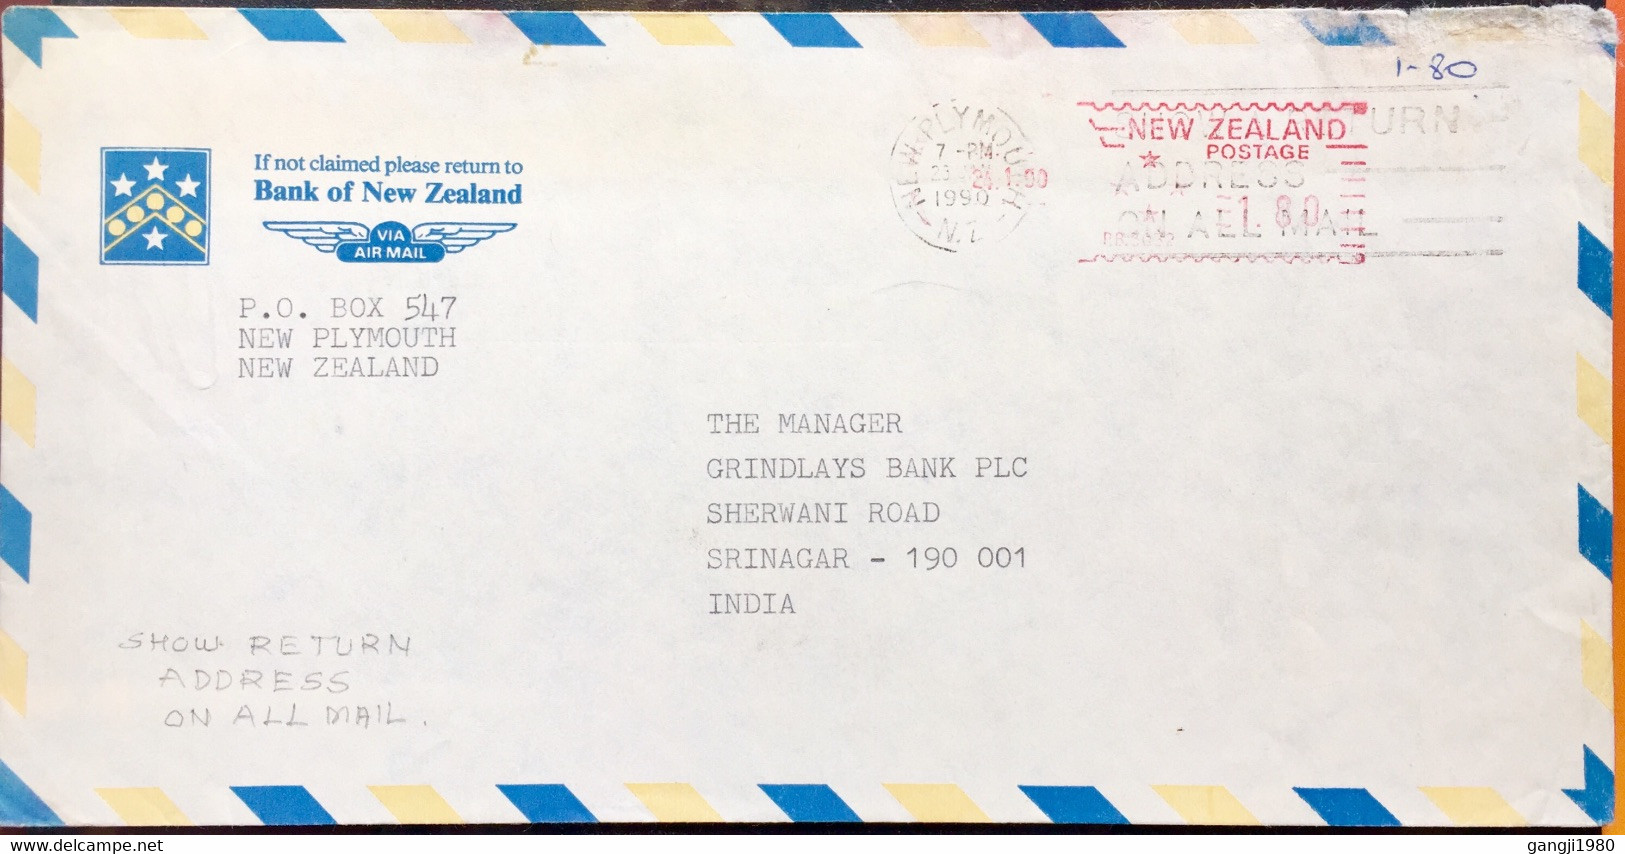 NEW ZEALAND 1990 SHOW RETURN ADDRESS ON ALL MAIL SLOGAN,NEW PLYMOUTH TO INDIA BANK OF NEW ZEALAND METER CANCELLATION - Storia Postale